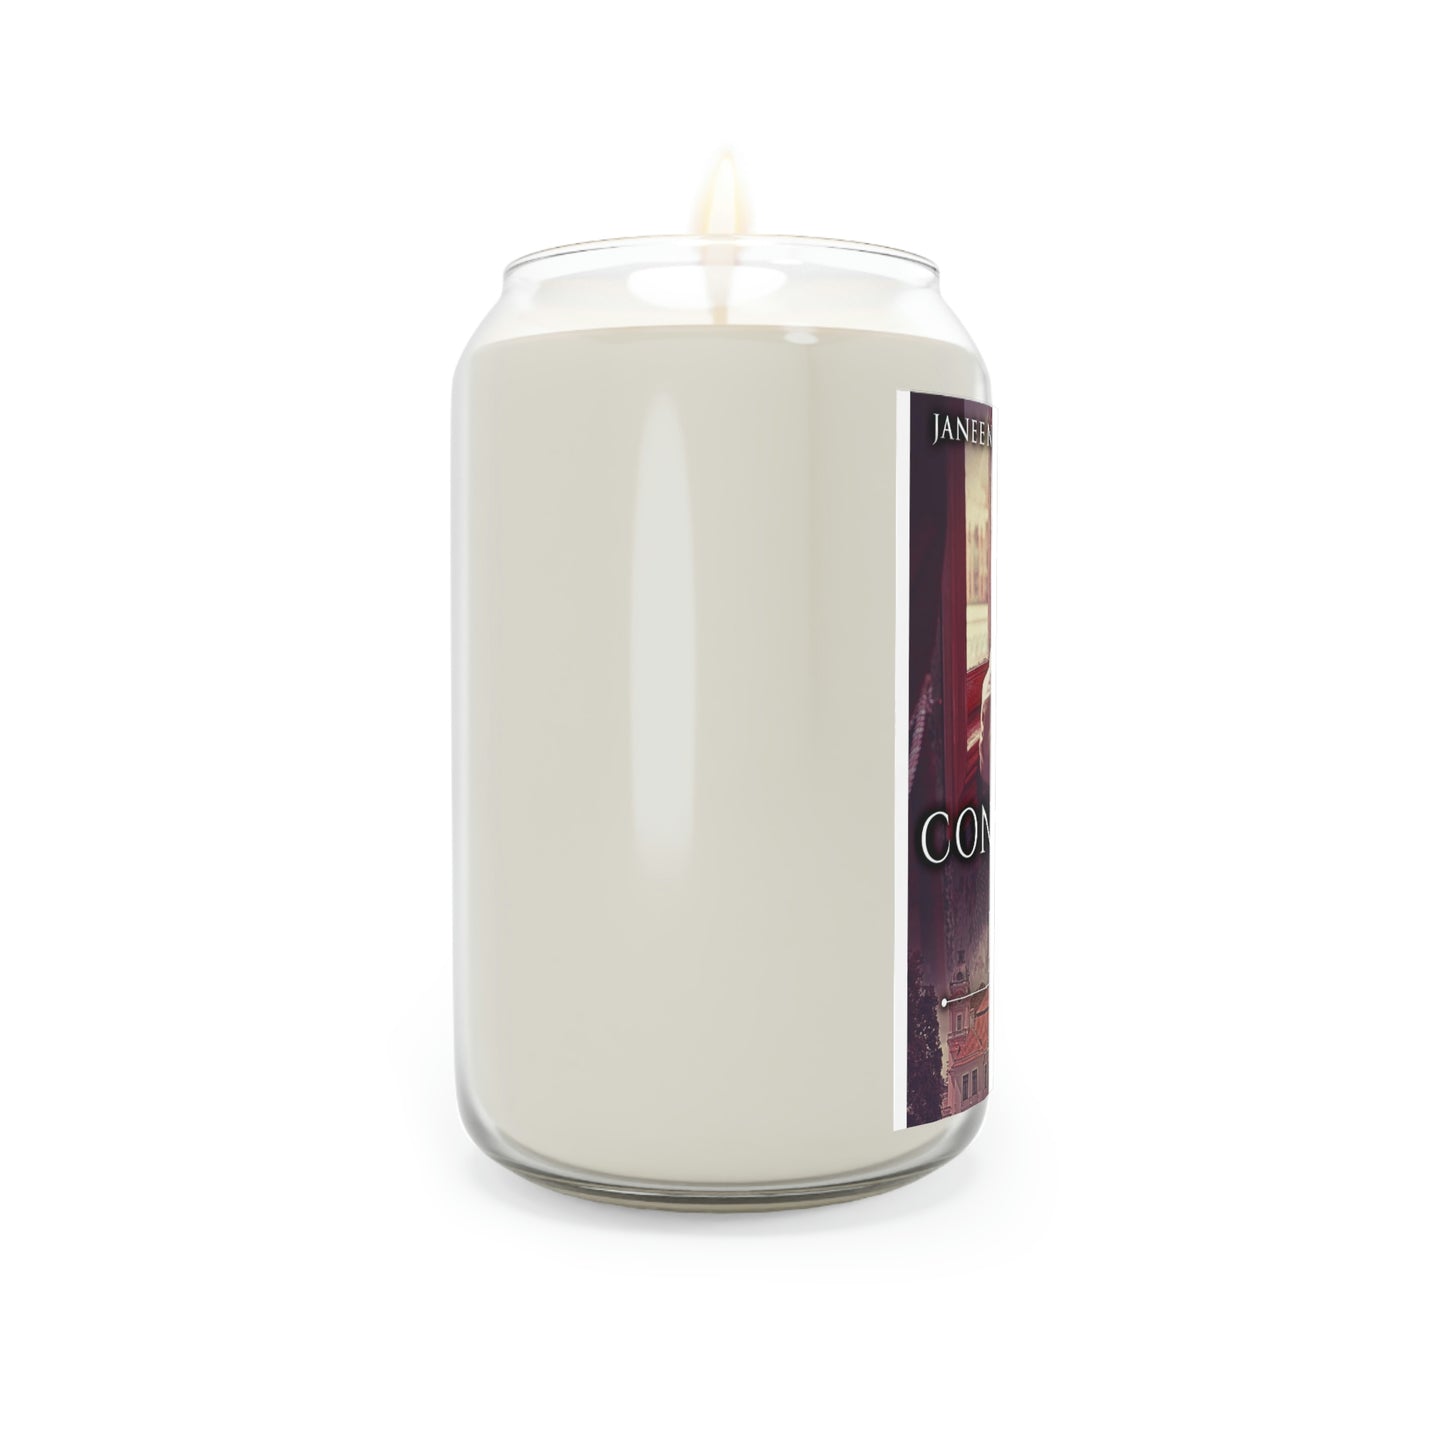 The Conviction Of Hope - Scented Candle